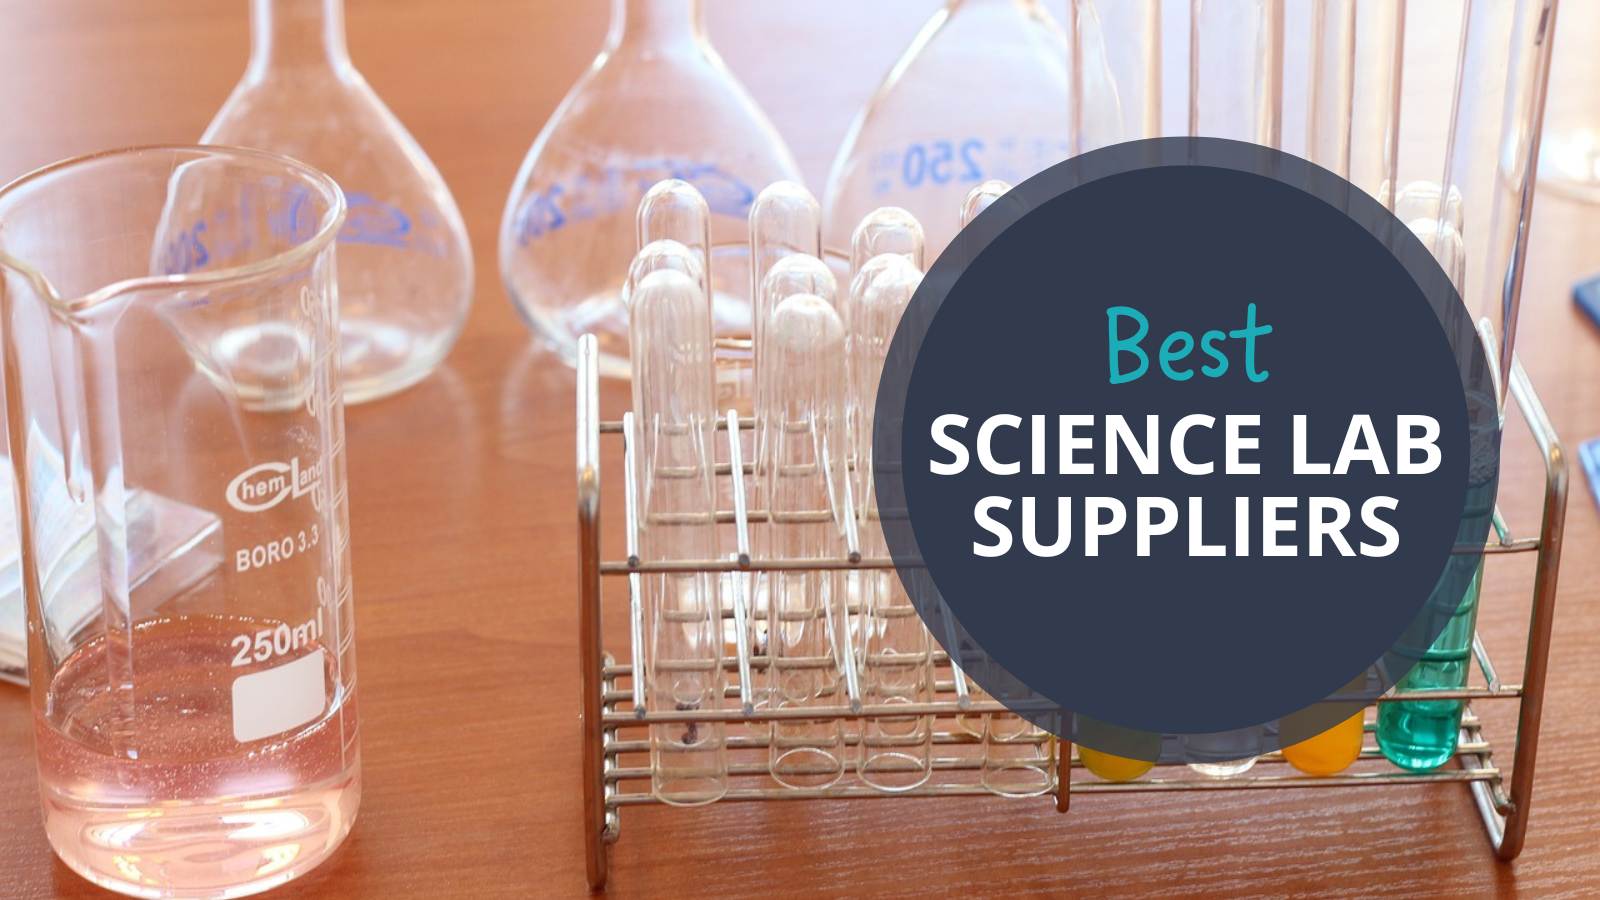 Science lab glassware like beakers and test tubes. Text reads Best Science Lab Supplies